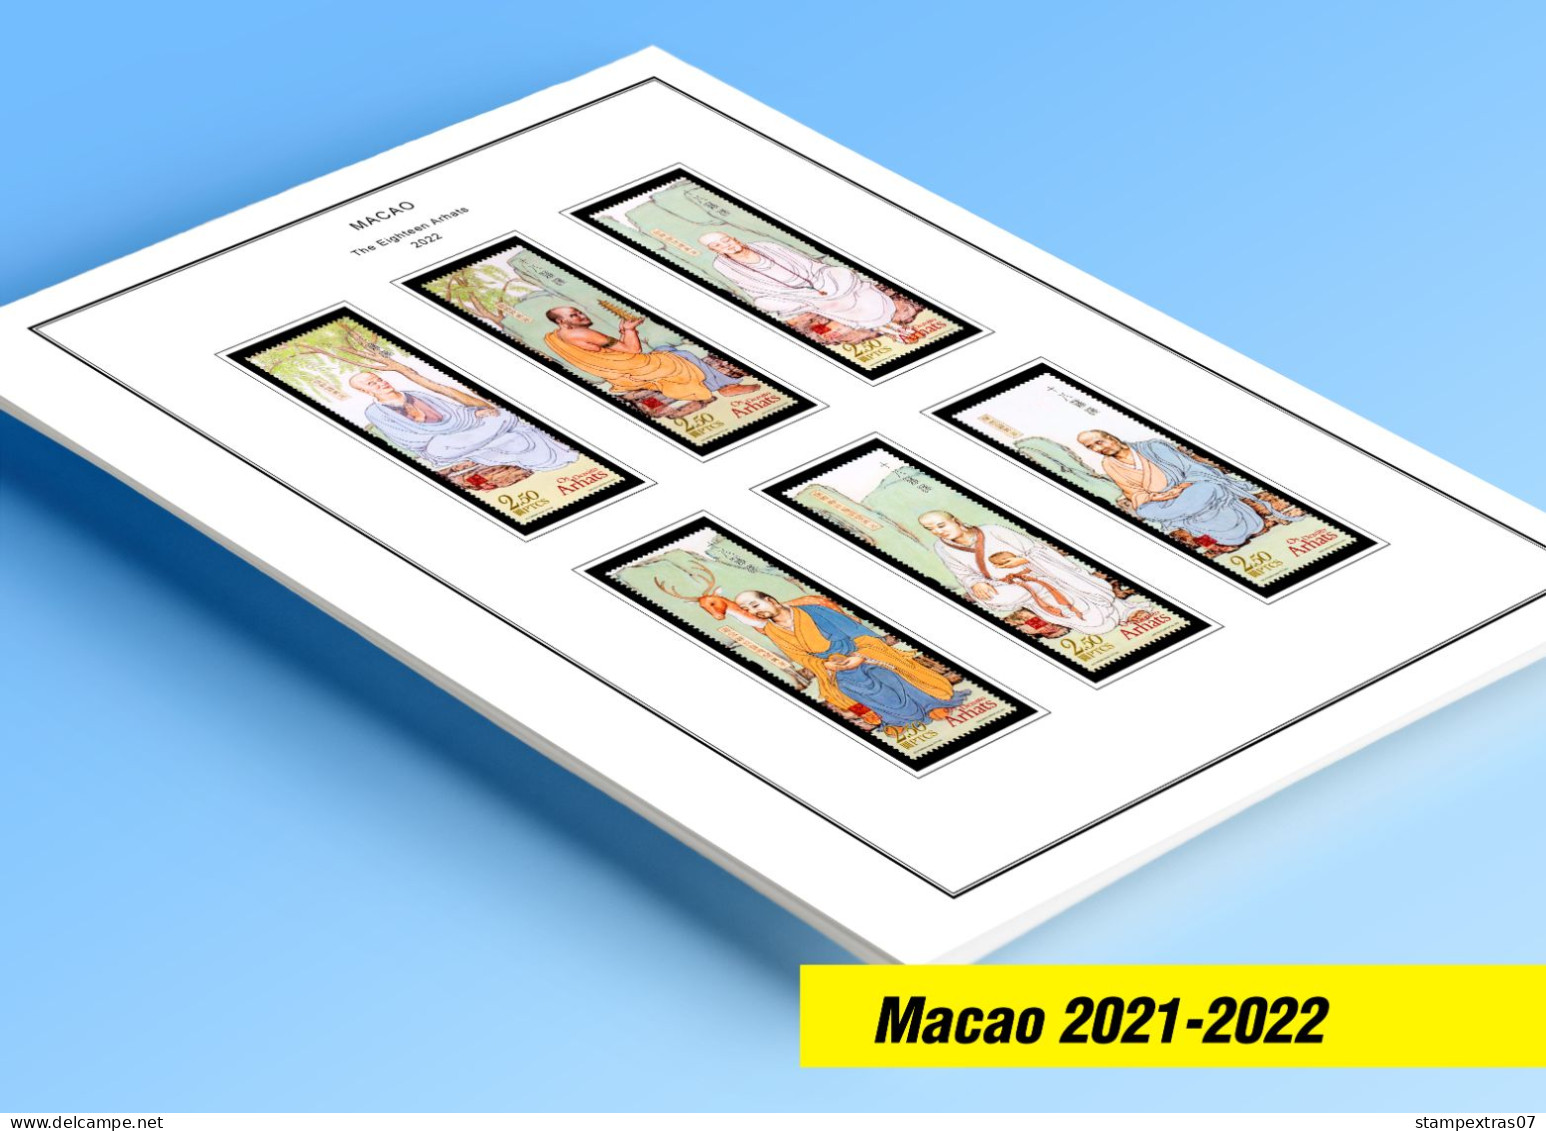 COLOR PRINTED MACAO [SAR] 2021-2022 STAMP ALBUM PAGES (33 Illustrated Pages) >> FEUILLES ALBUM - Pre-printed Pages